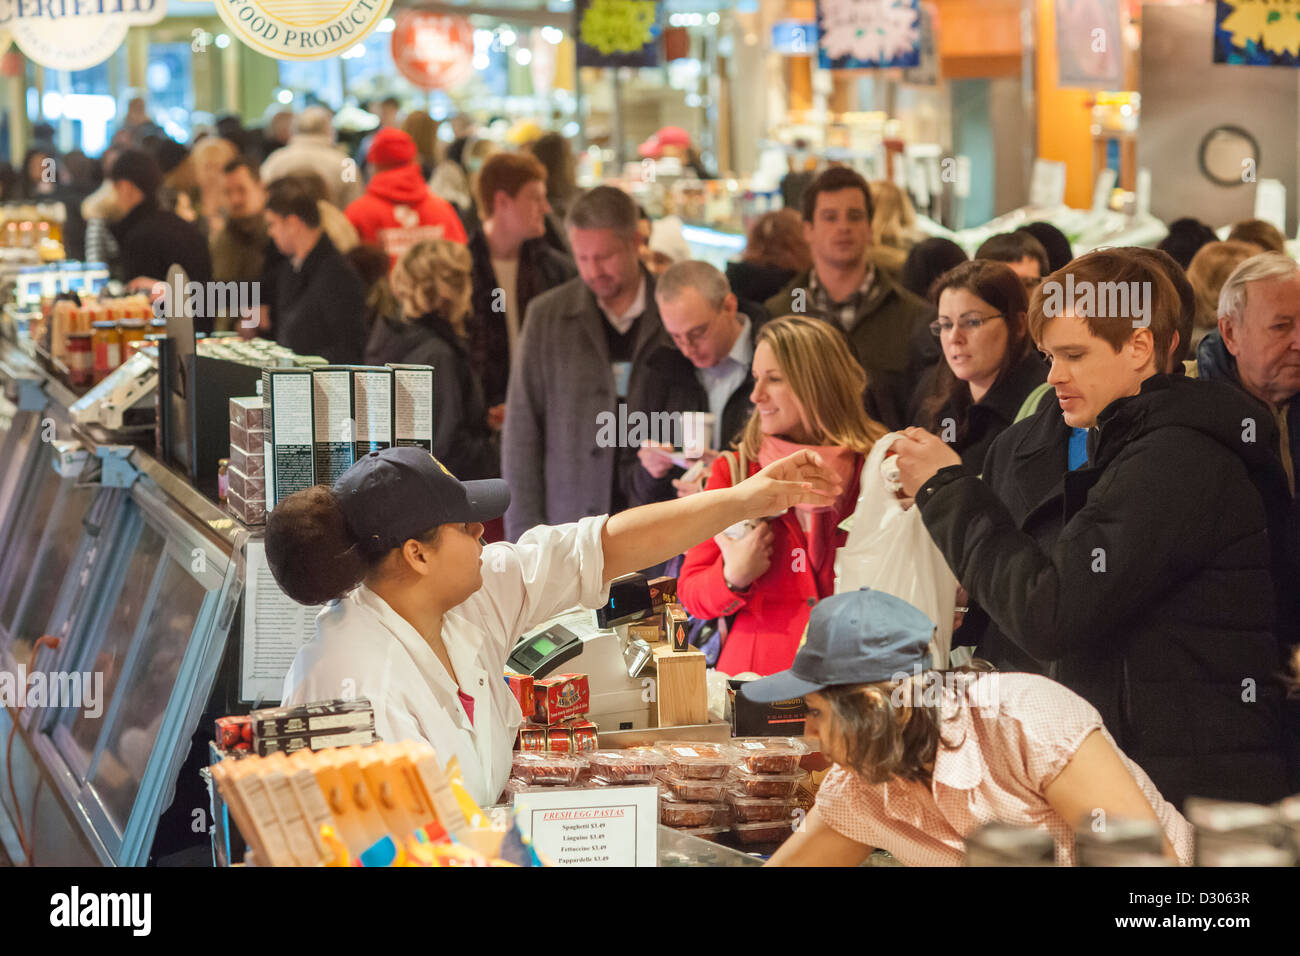 Shoppers in Grand Central Market in Grand Central Terminal in New York Stock Photo